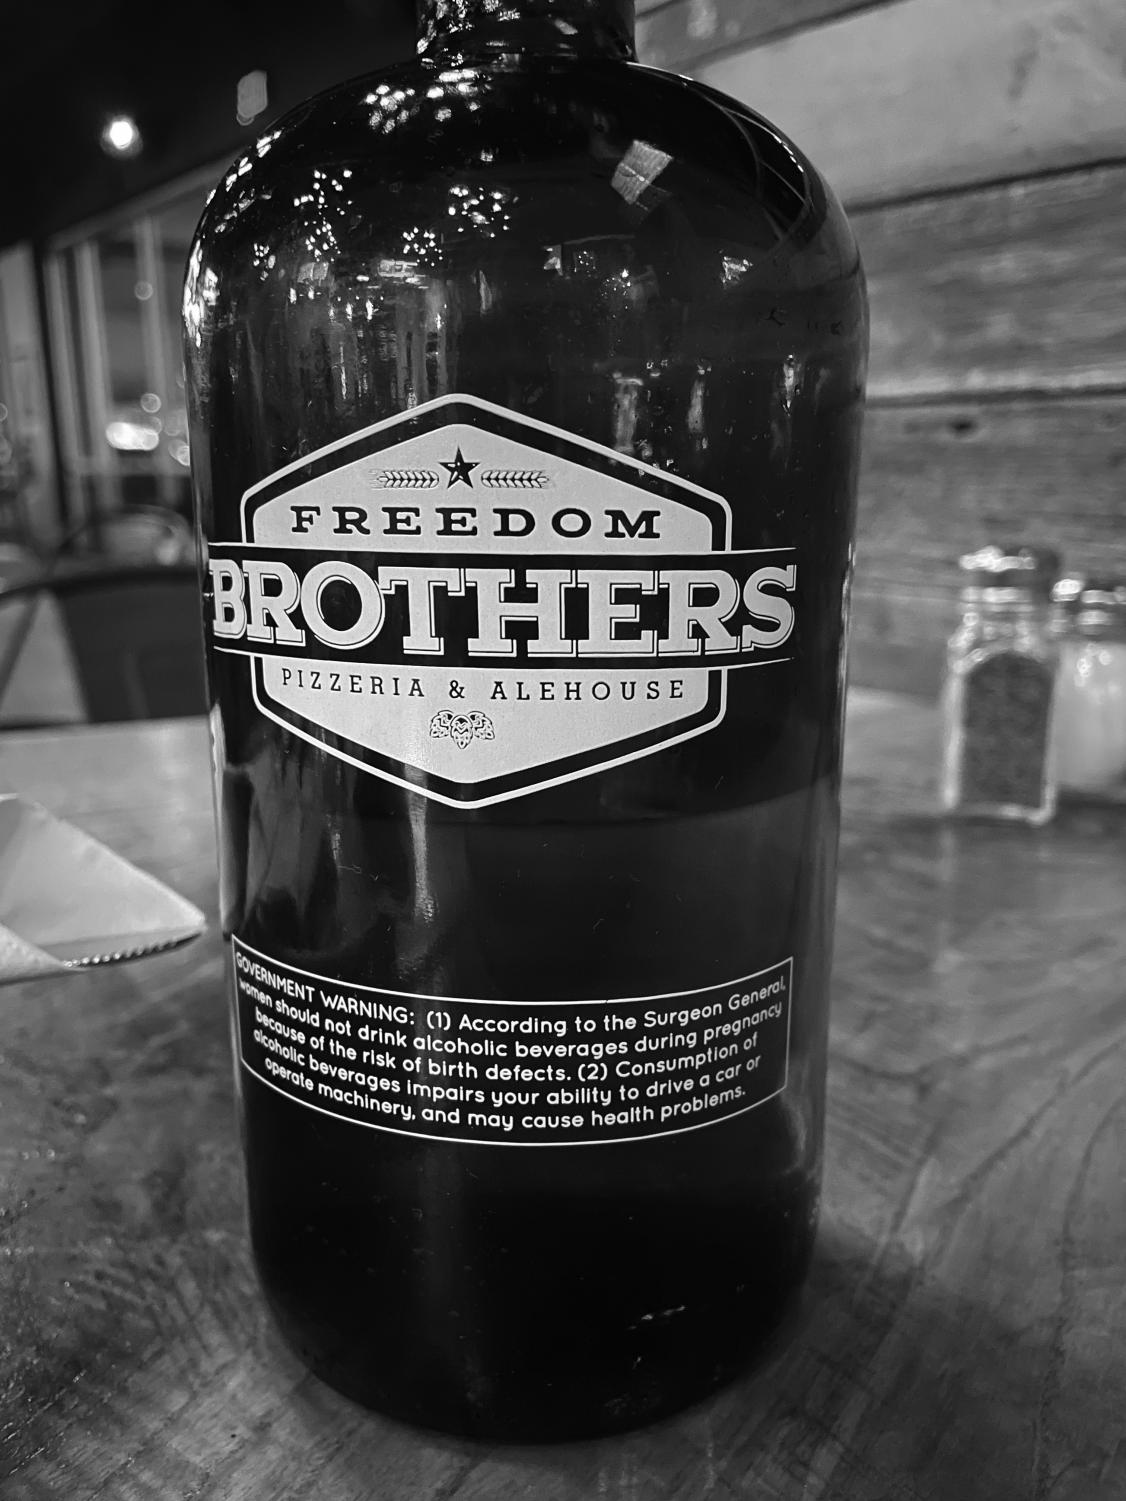 Bottle showcased at Freedom Brothers Pizza. Photo by Alex Barlog